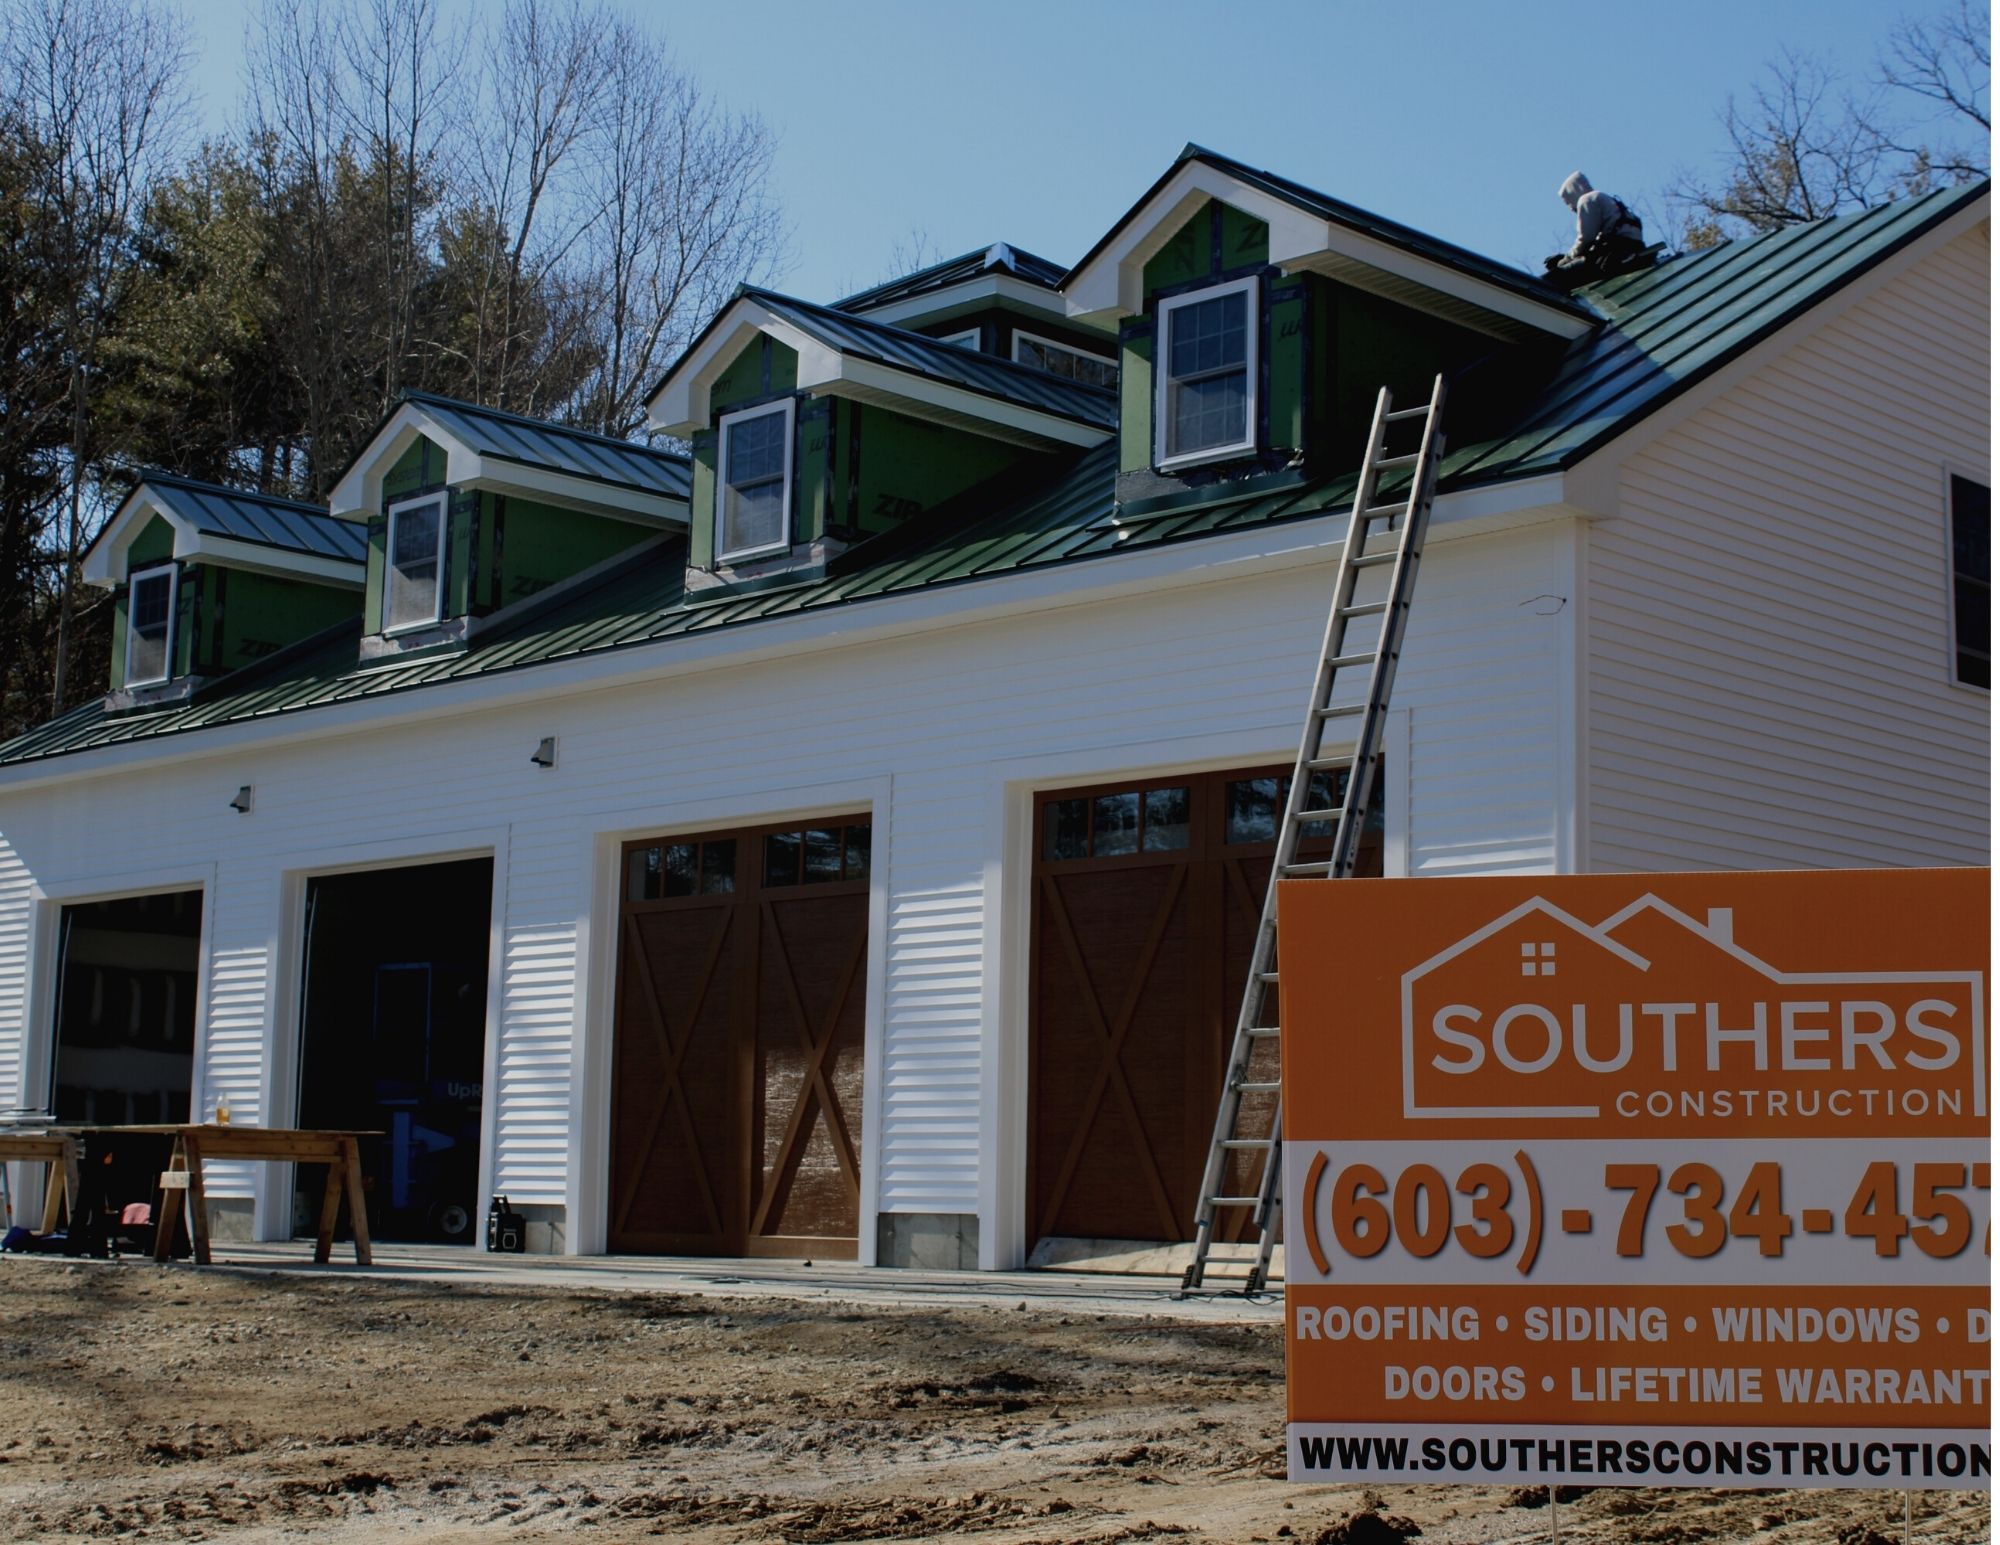 CertainTeed Siding and Green Metal Roof with a Southers Construction Sign